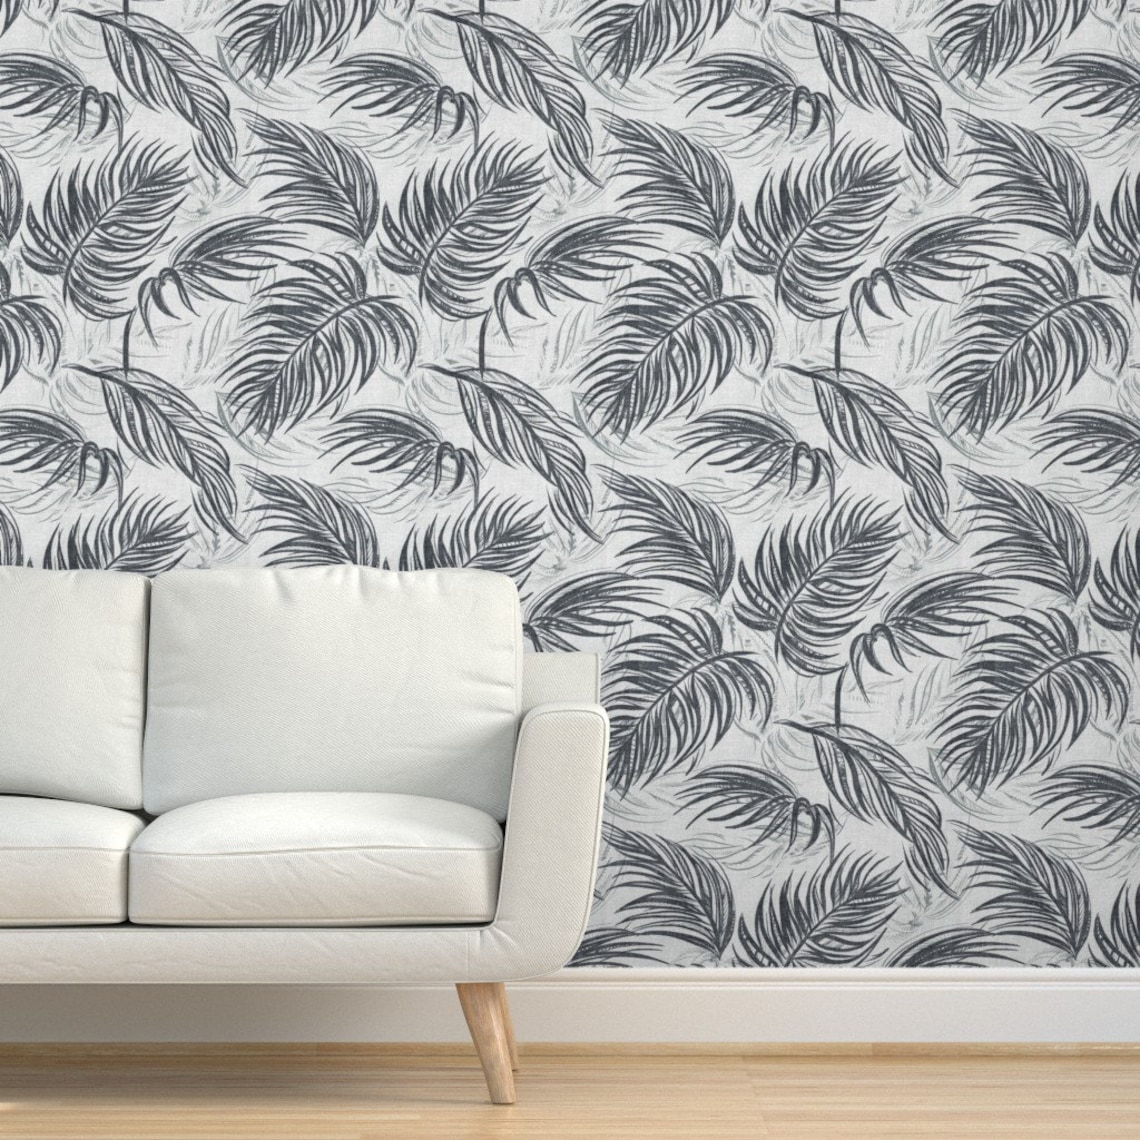 Palm Leaf Wallpaper Palm Silver By Pattern State Tropical | Etsy